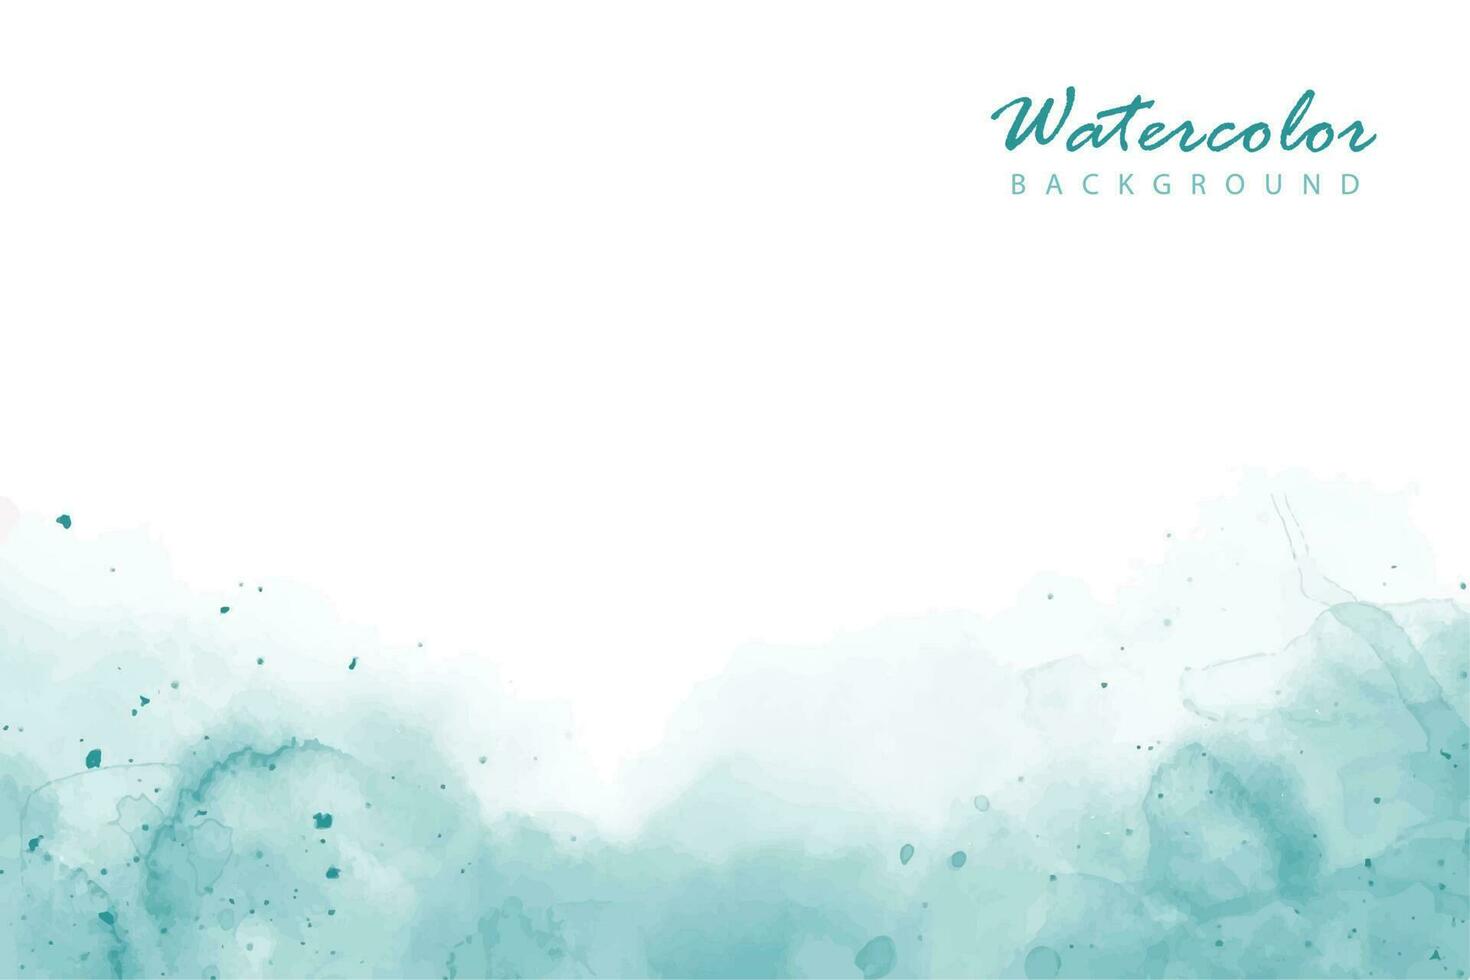 Artistic, abstract blue, teal, turquoise watercolor background with splashes with mist fog effect vector